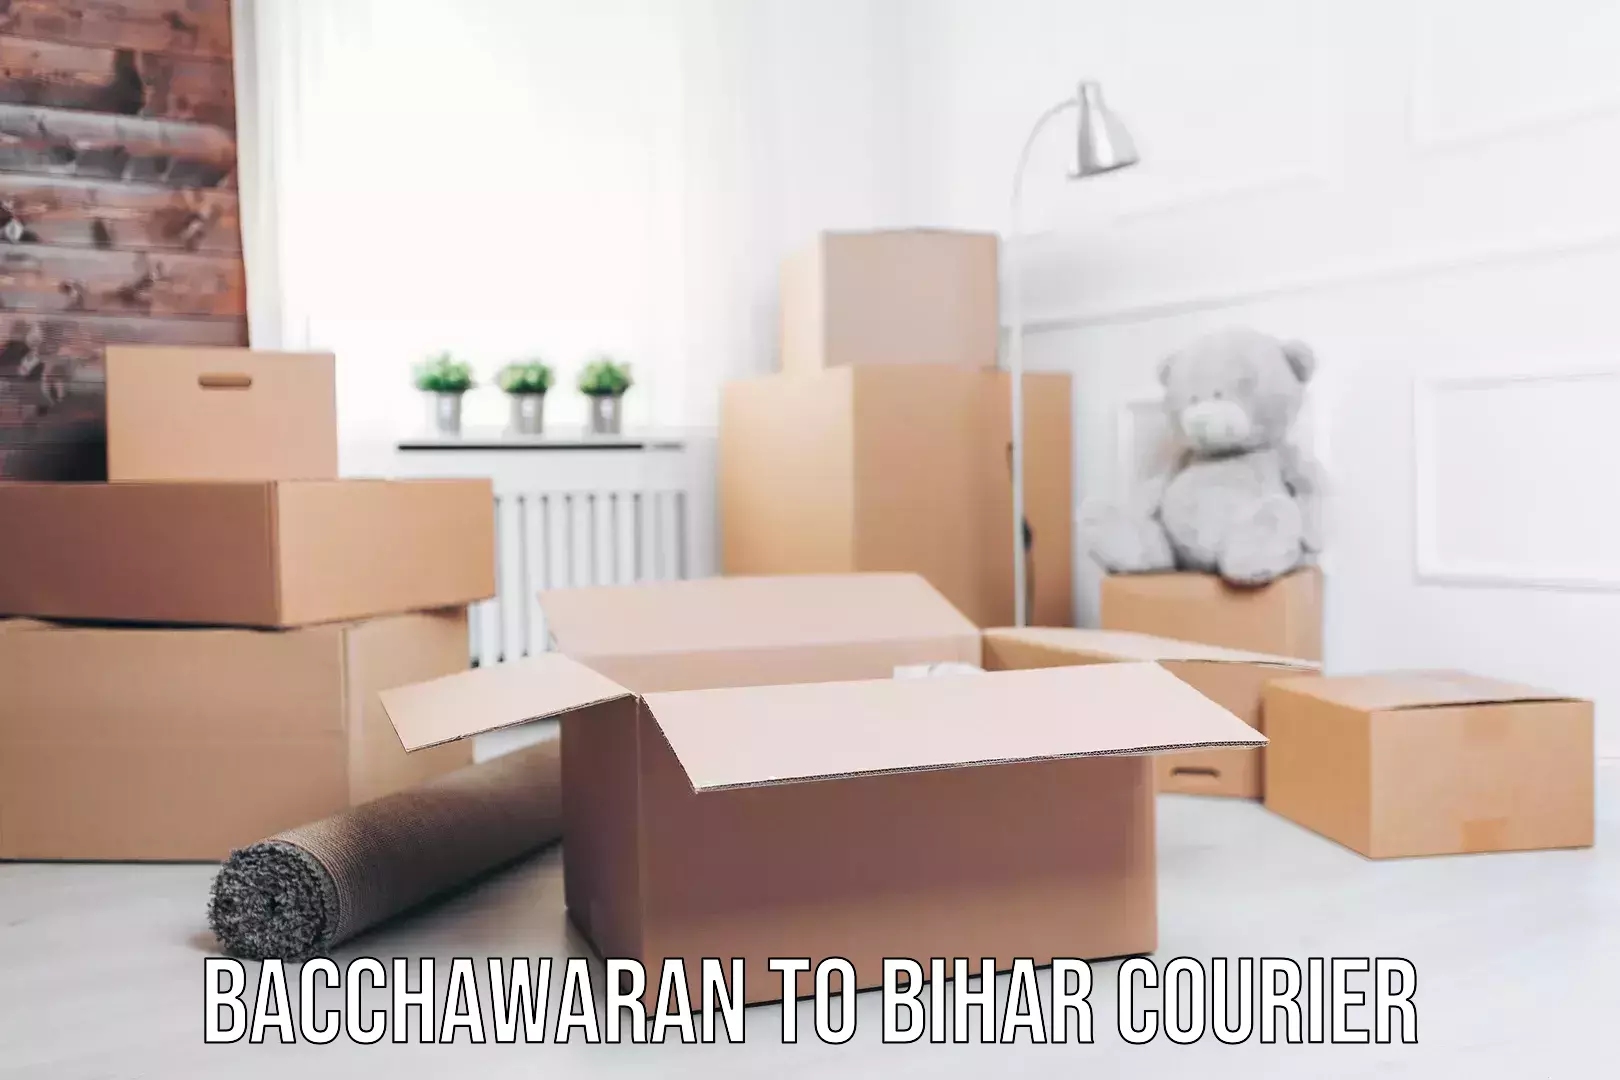 24/7 courier service in Bacchawaran to Supaul